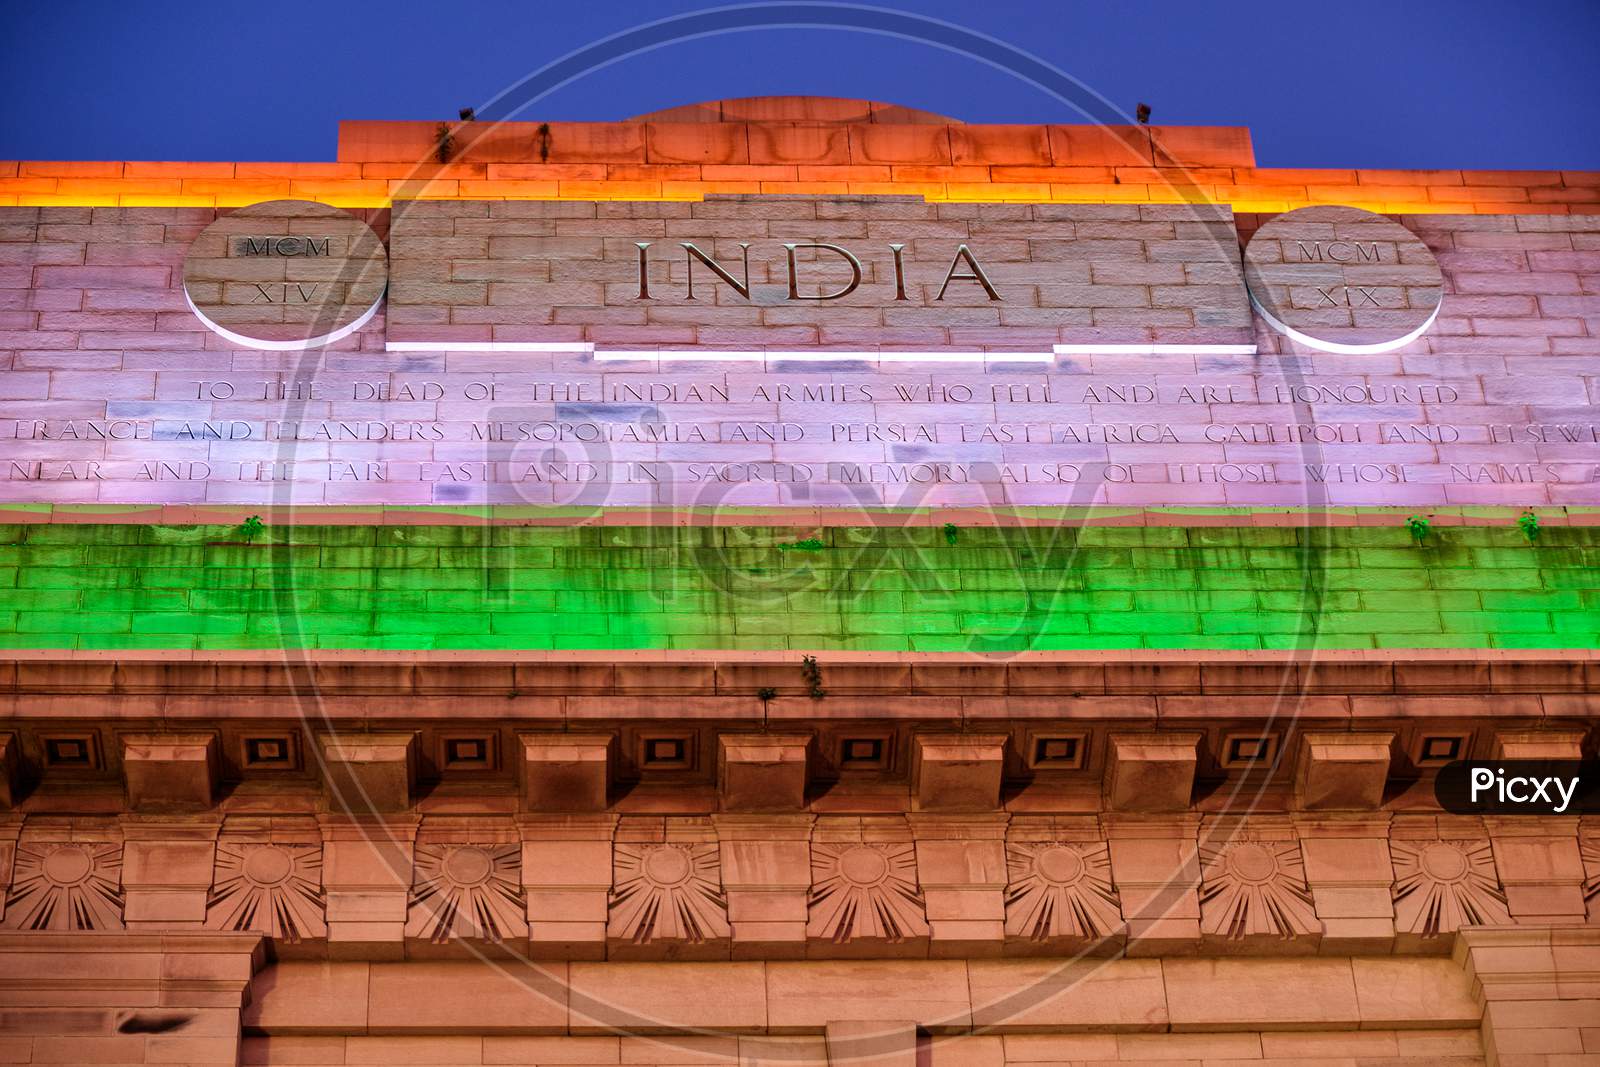 India Gate War Memorial In New Delhi, India, Illuminated In Colors Of Indian National Flag